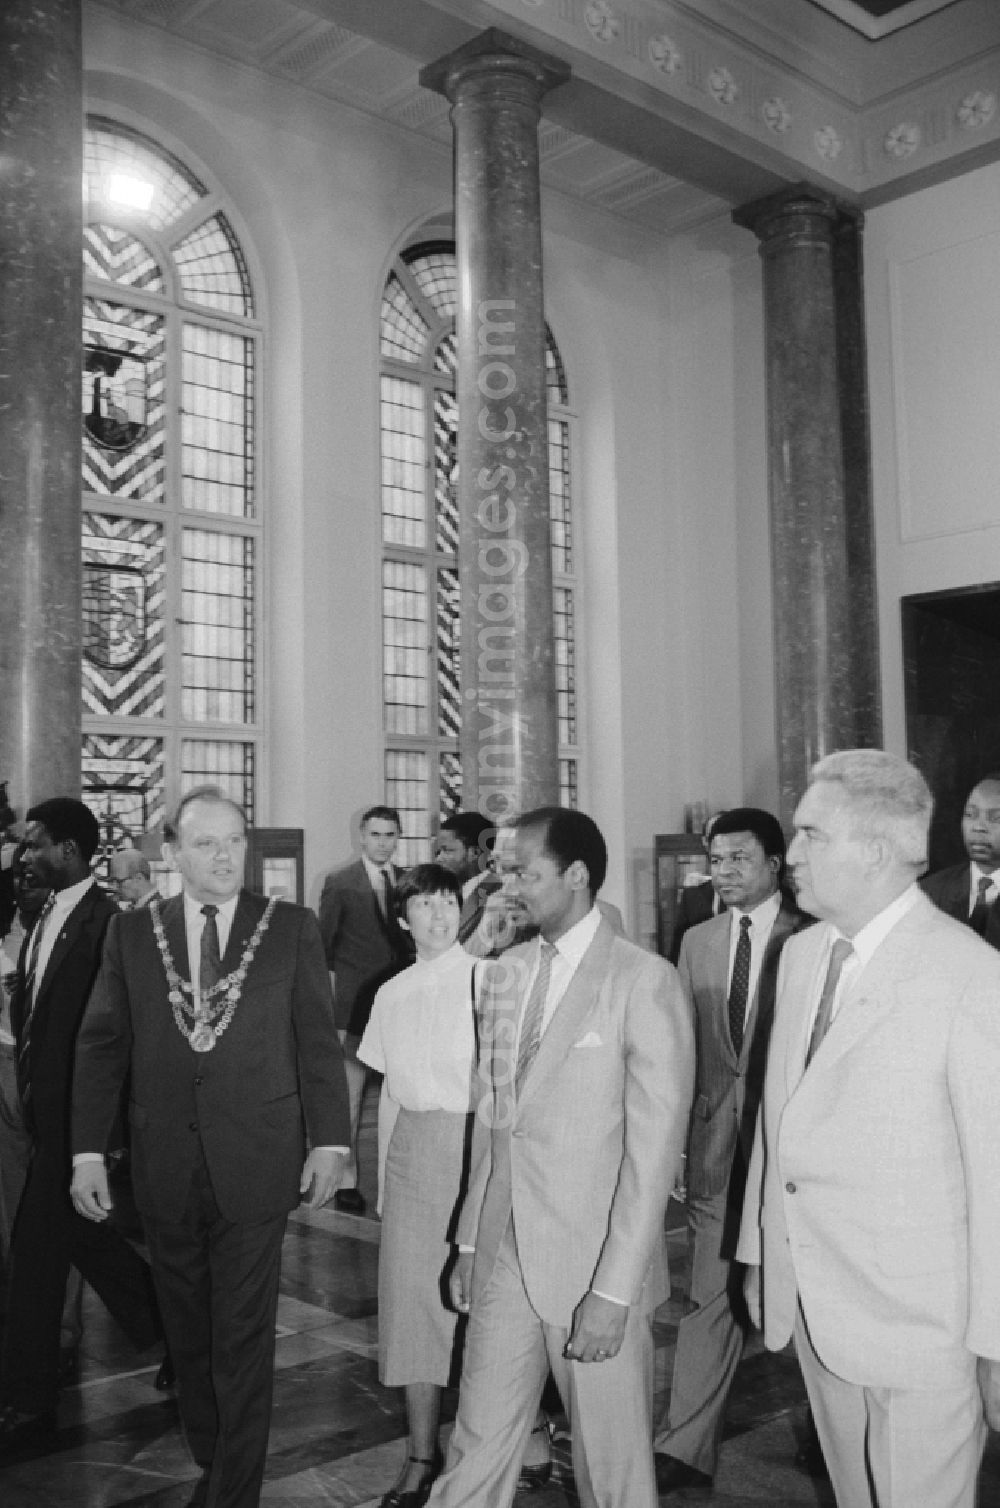 GDR photo archive: Berlin - State visit of the President of Mozambique Joaquim Alberto Chissanon in the Red City Hall of Berlin, the former capital of the GDR, German Democratic Republic. In the picture with the Lord Mayor of East Berlin Erhard Krack